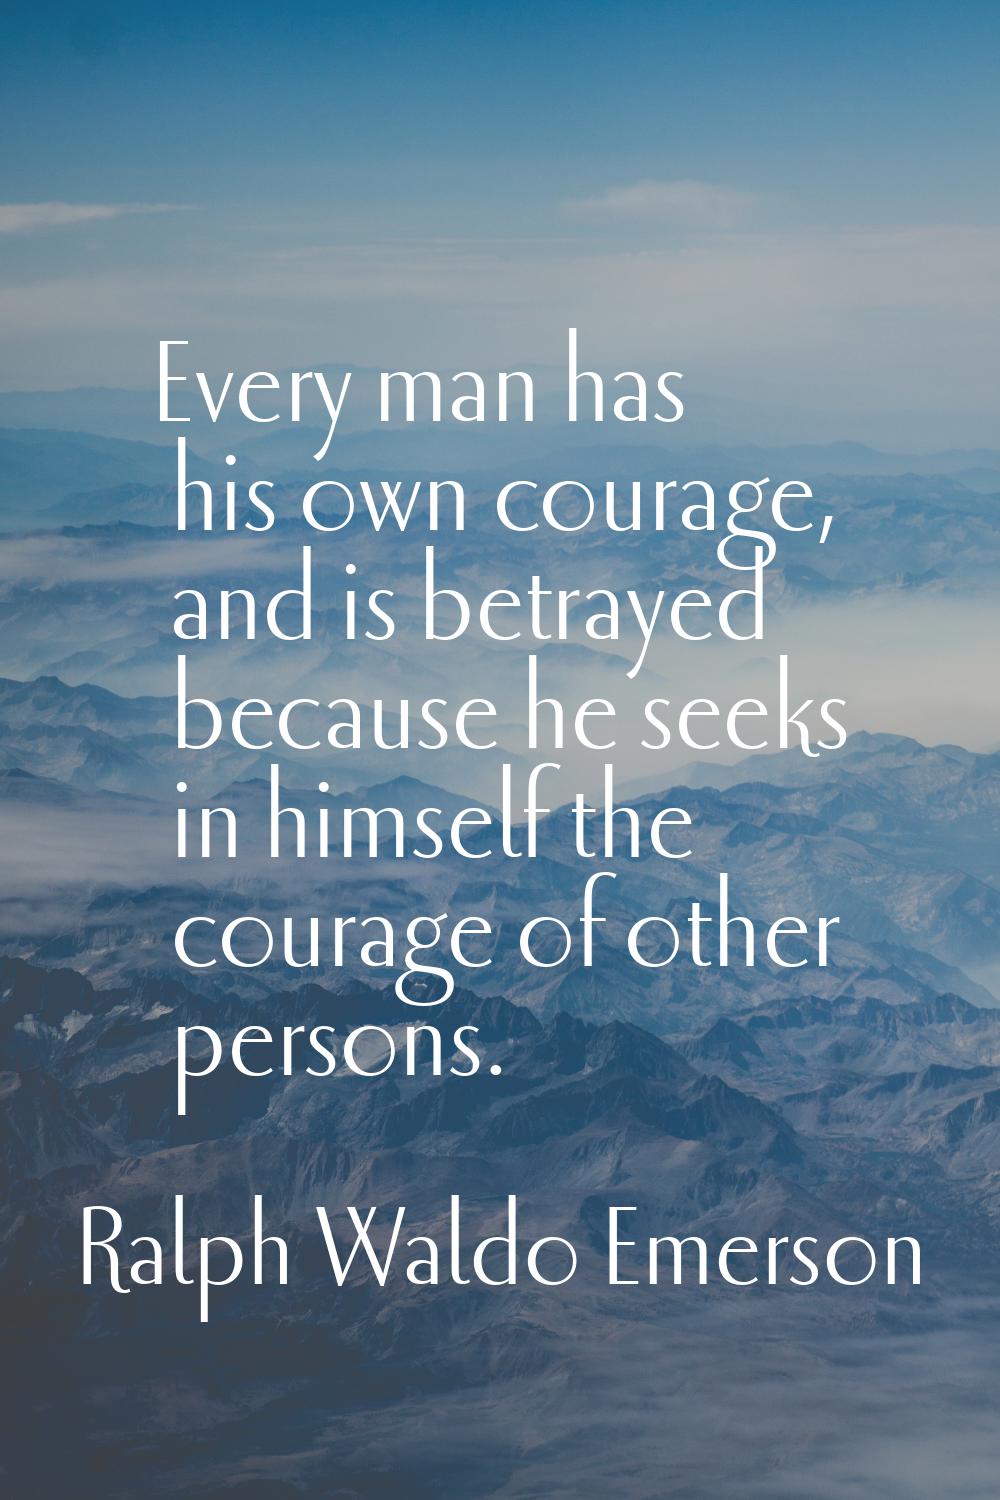 Every man has his own courage, and is betrayed because he seeks in himself the courage of other per